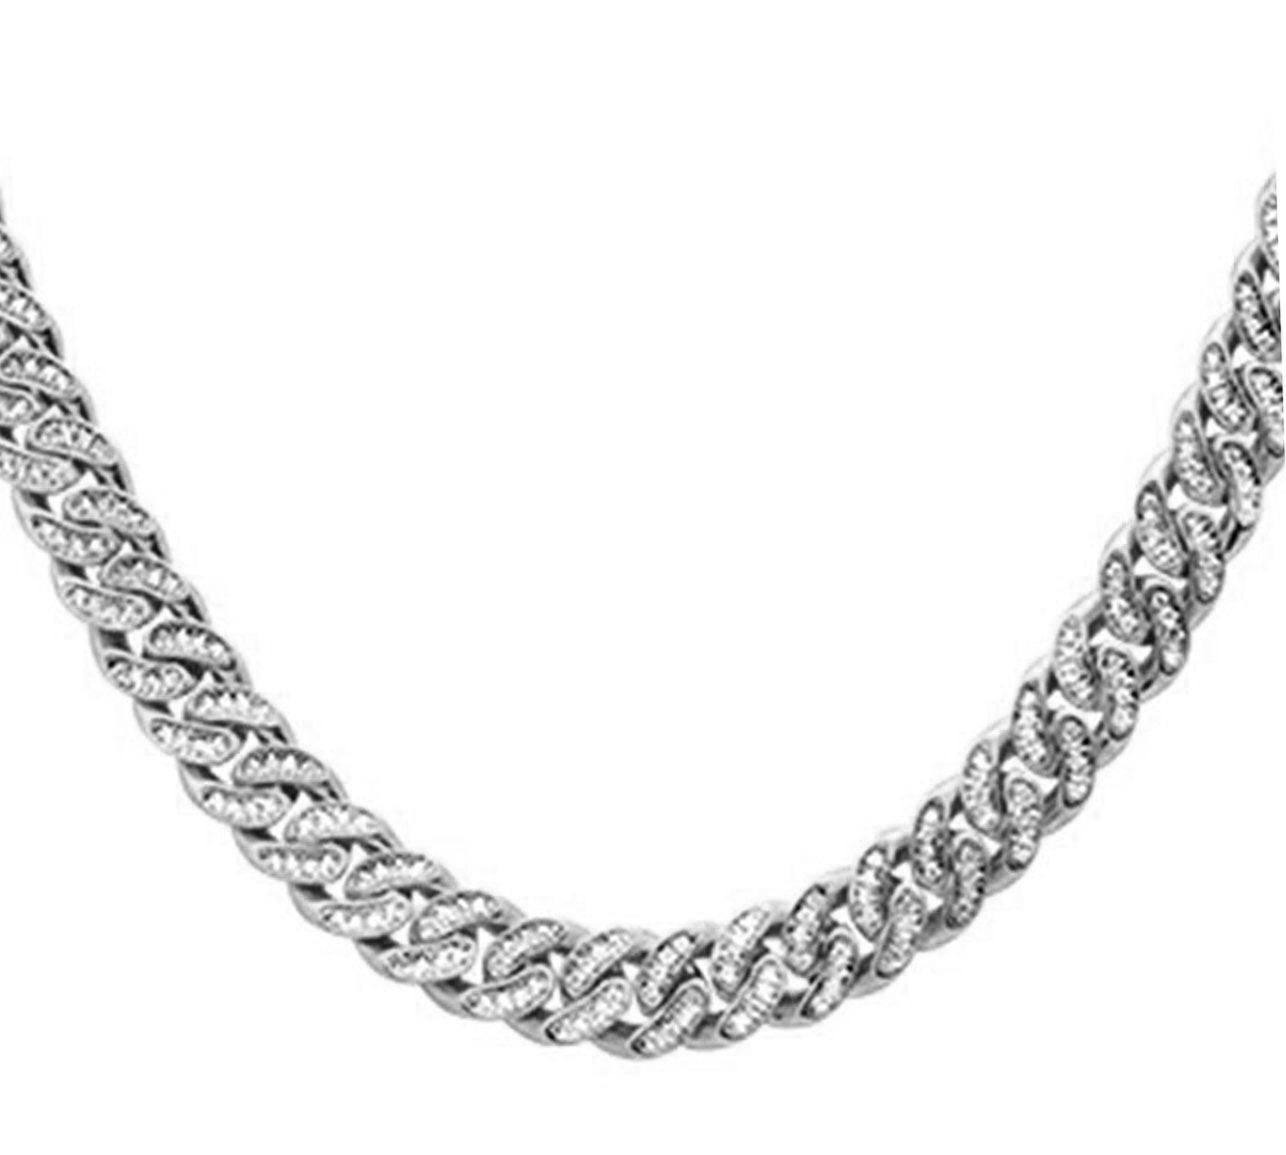 <span style="color:purple">SPECIAL!</span>  4mm 2.25ct G SI 14k White Gold Round Diamond Cuban Necklace 22"